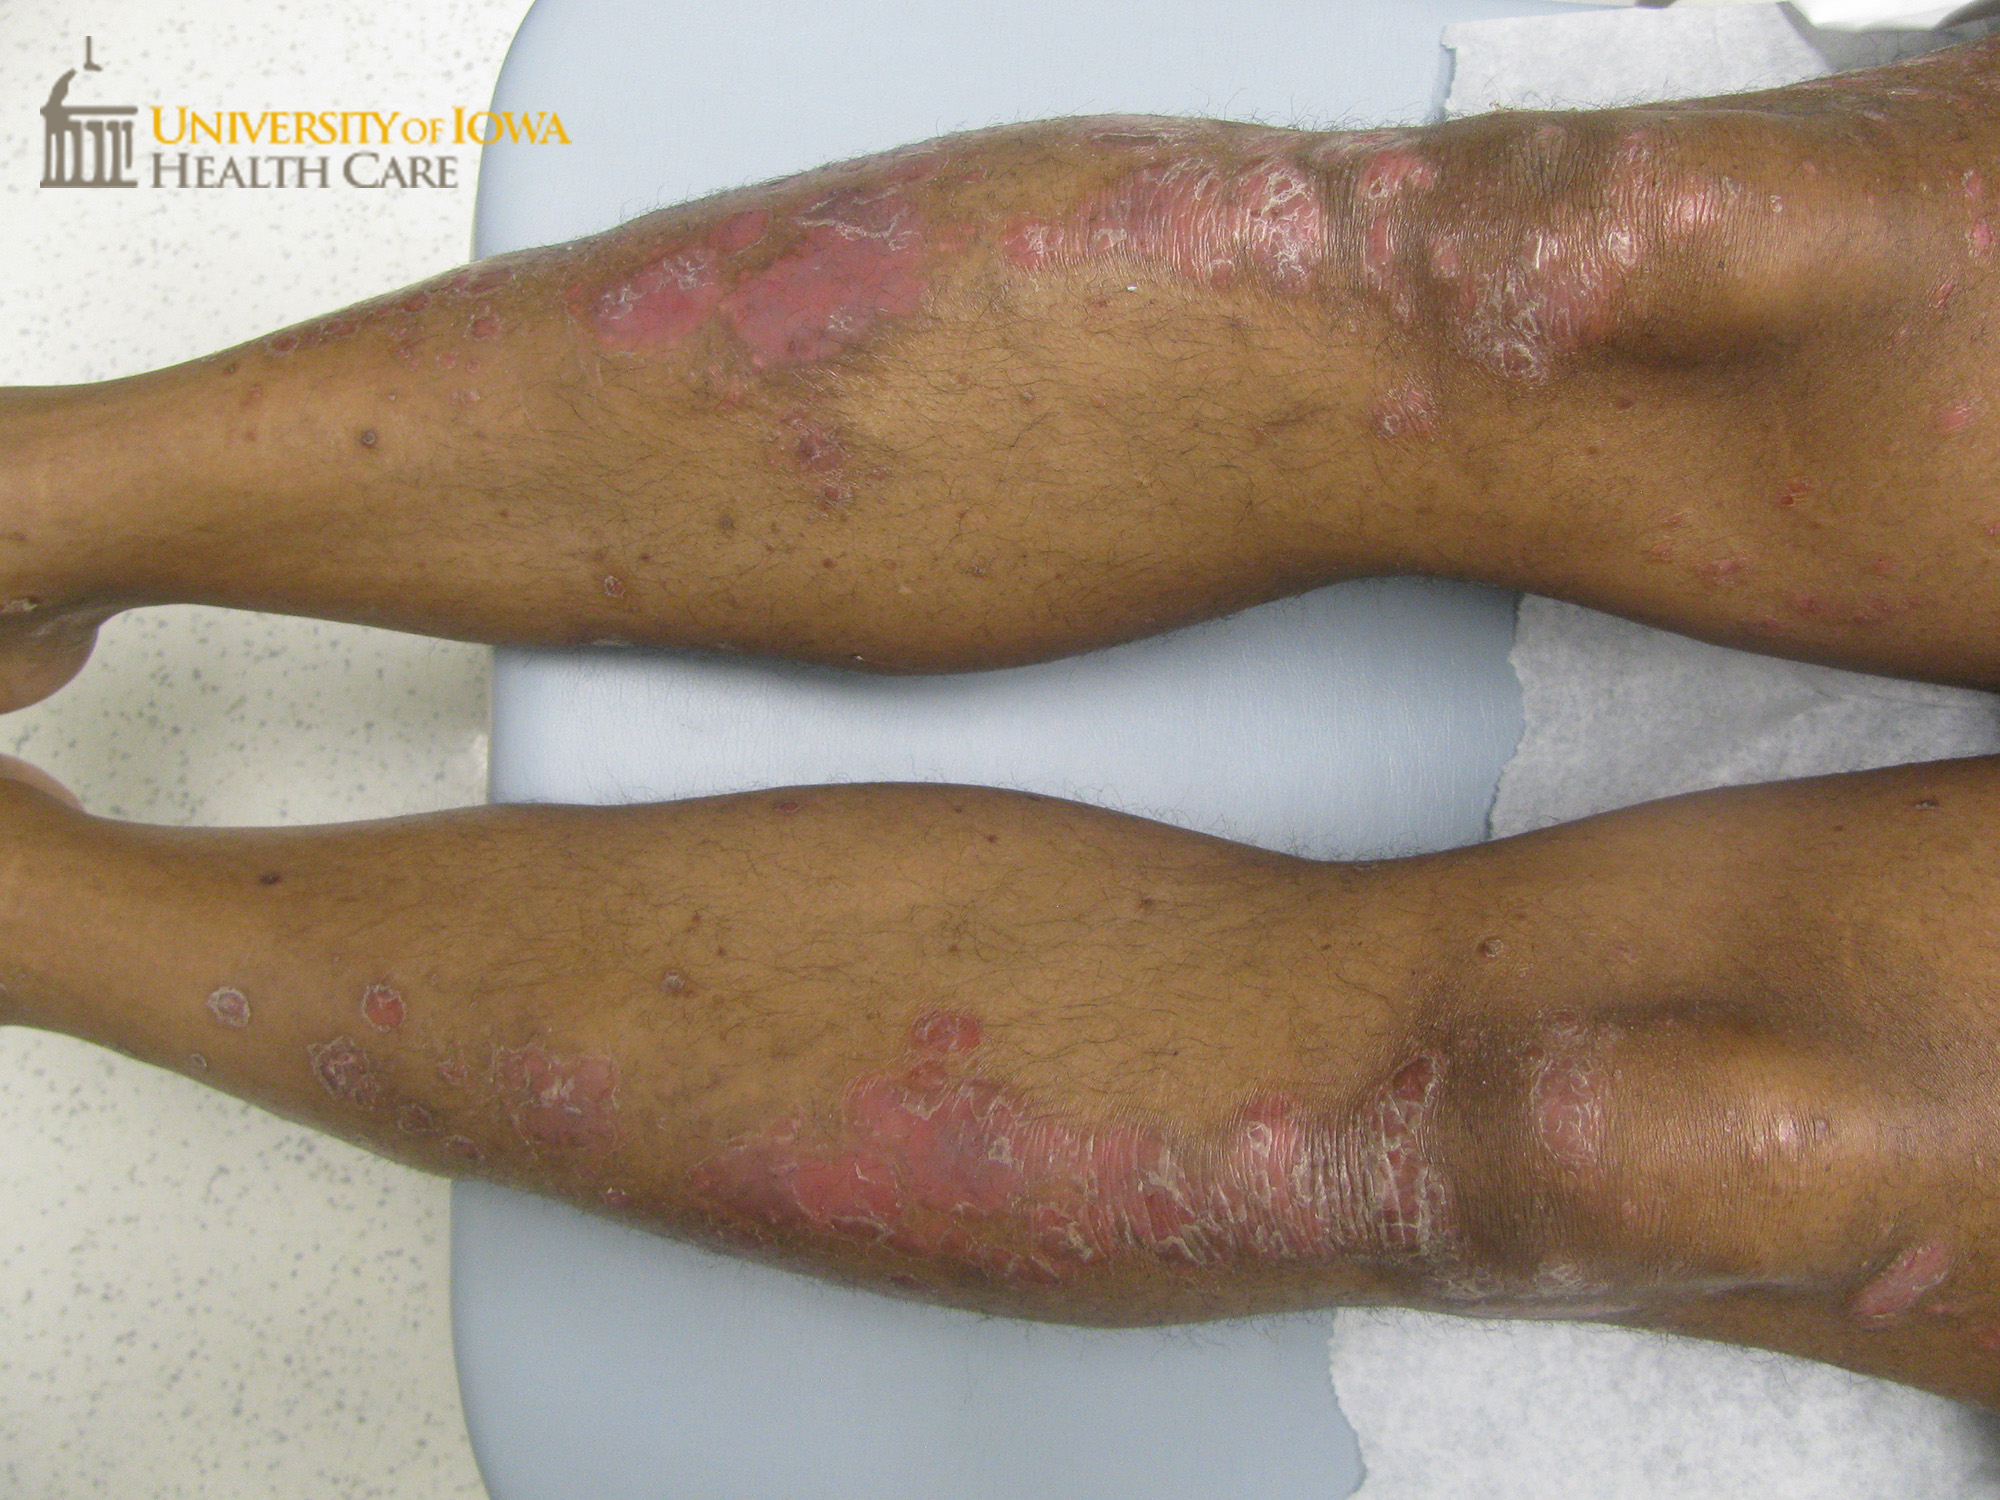 Salmon-colored papules and plaques with collarette of scale on the lower legs. (click images for higher resolution).